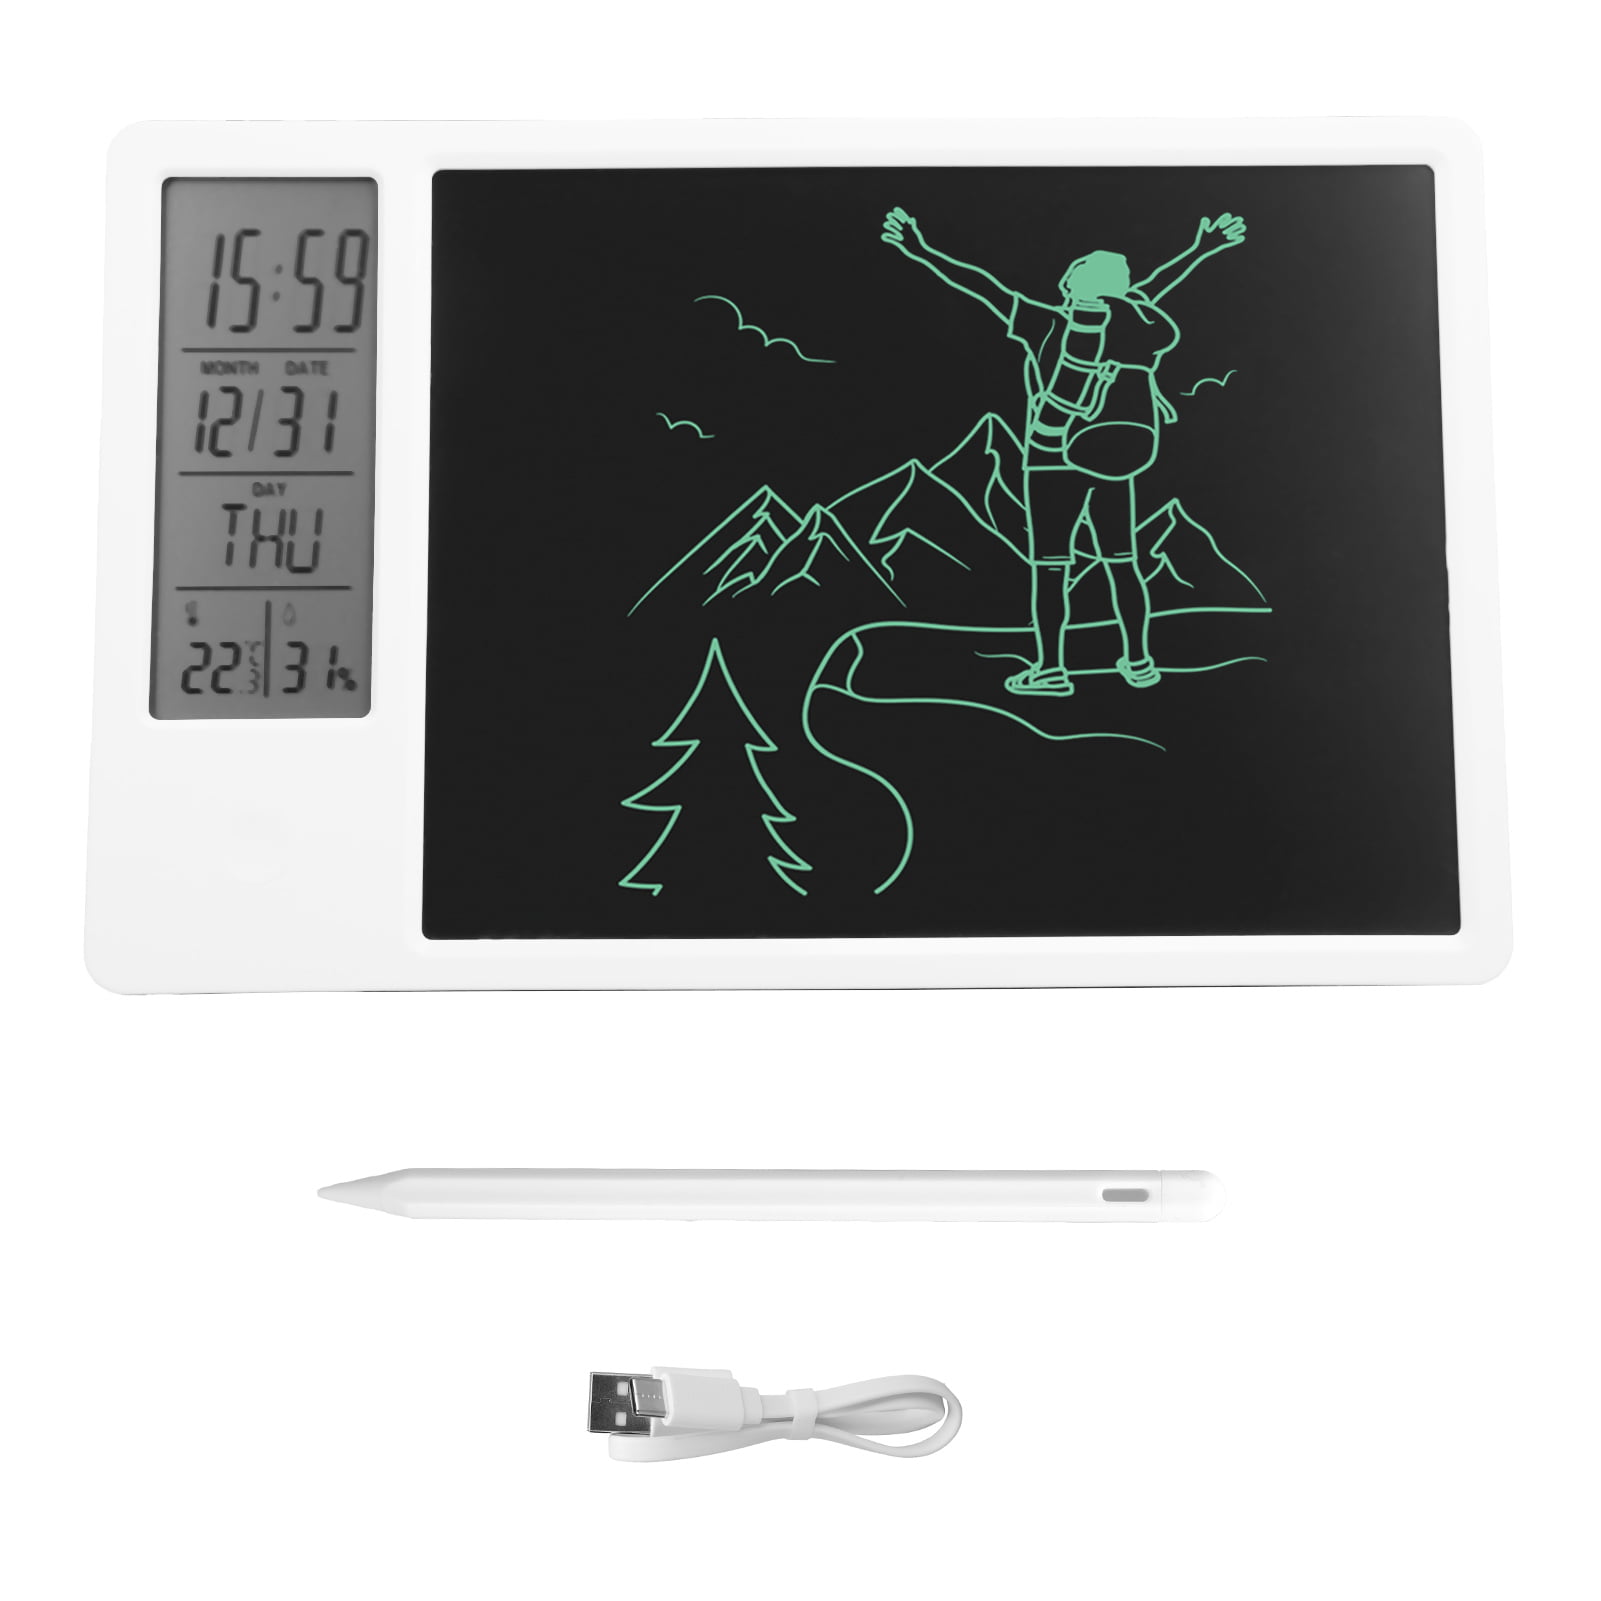 Richgv LCD Writing Tablet, 15 Inch Super Big Size Writing Doodle